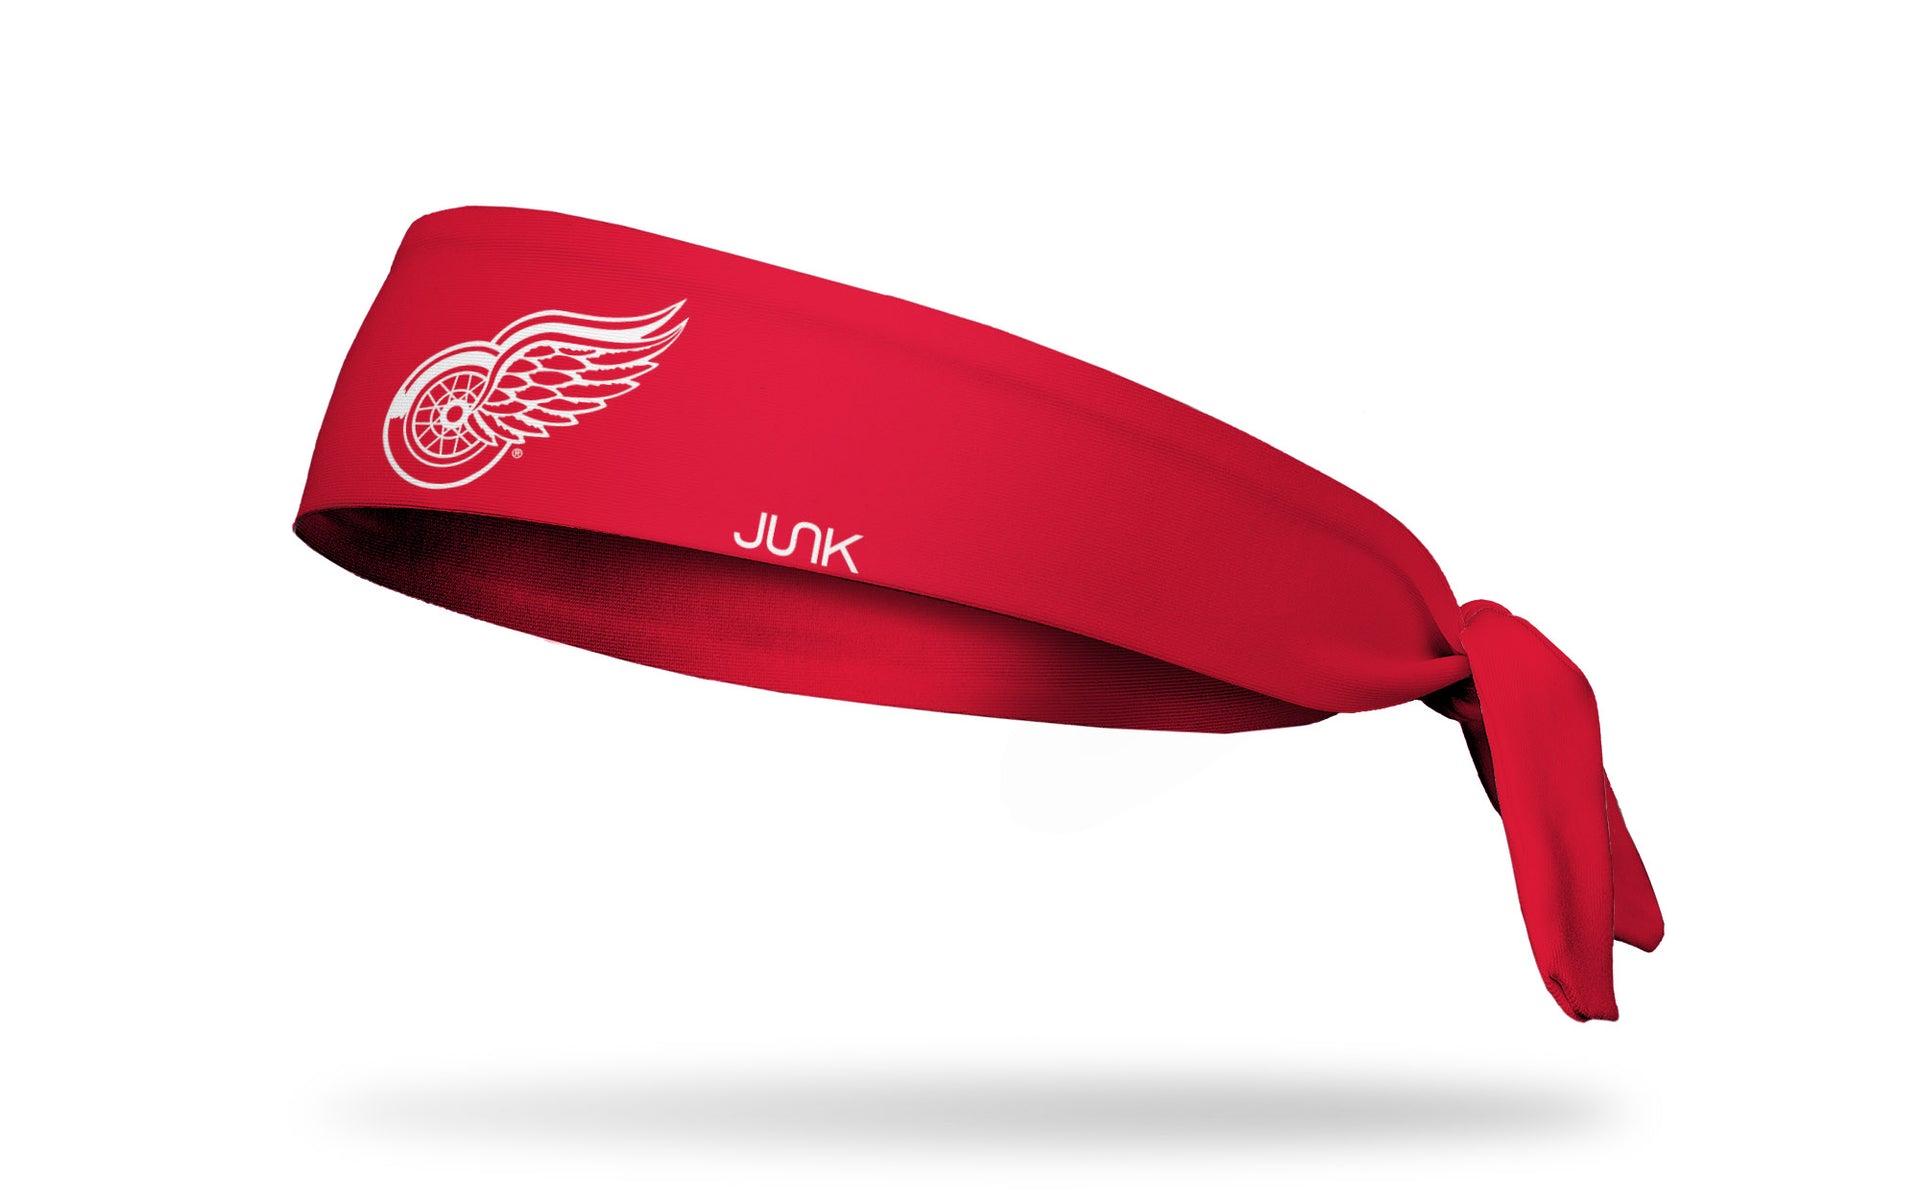 Detroit Red Wings: Logo Red Tie Headband - View 1